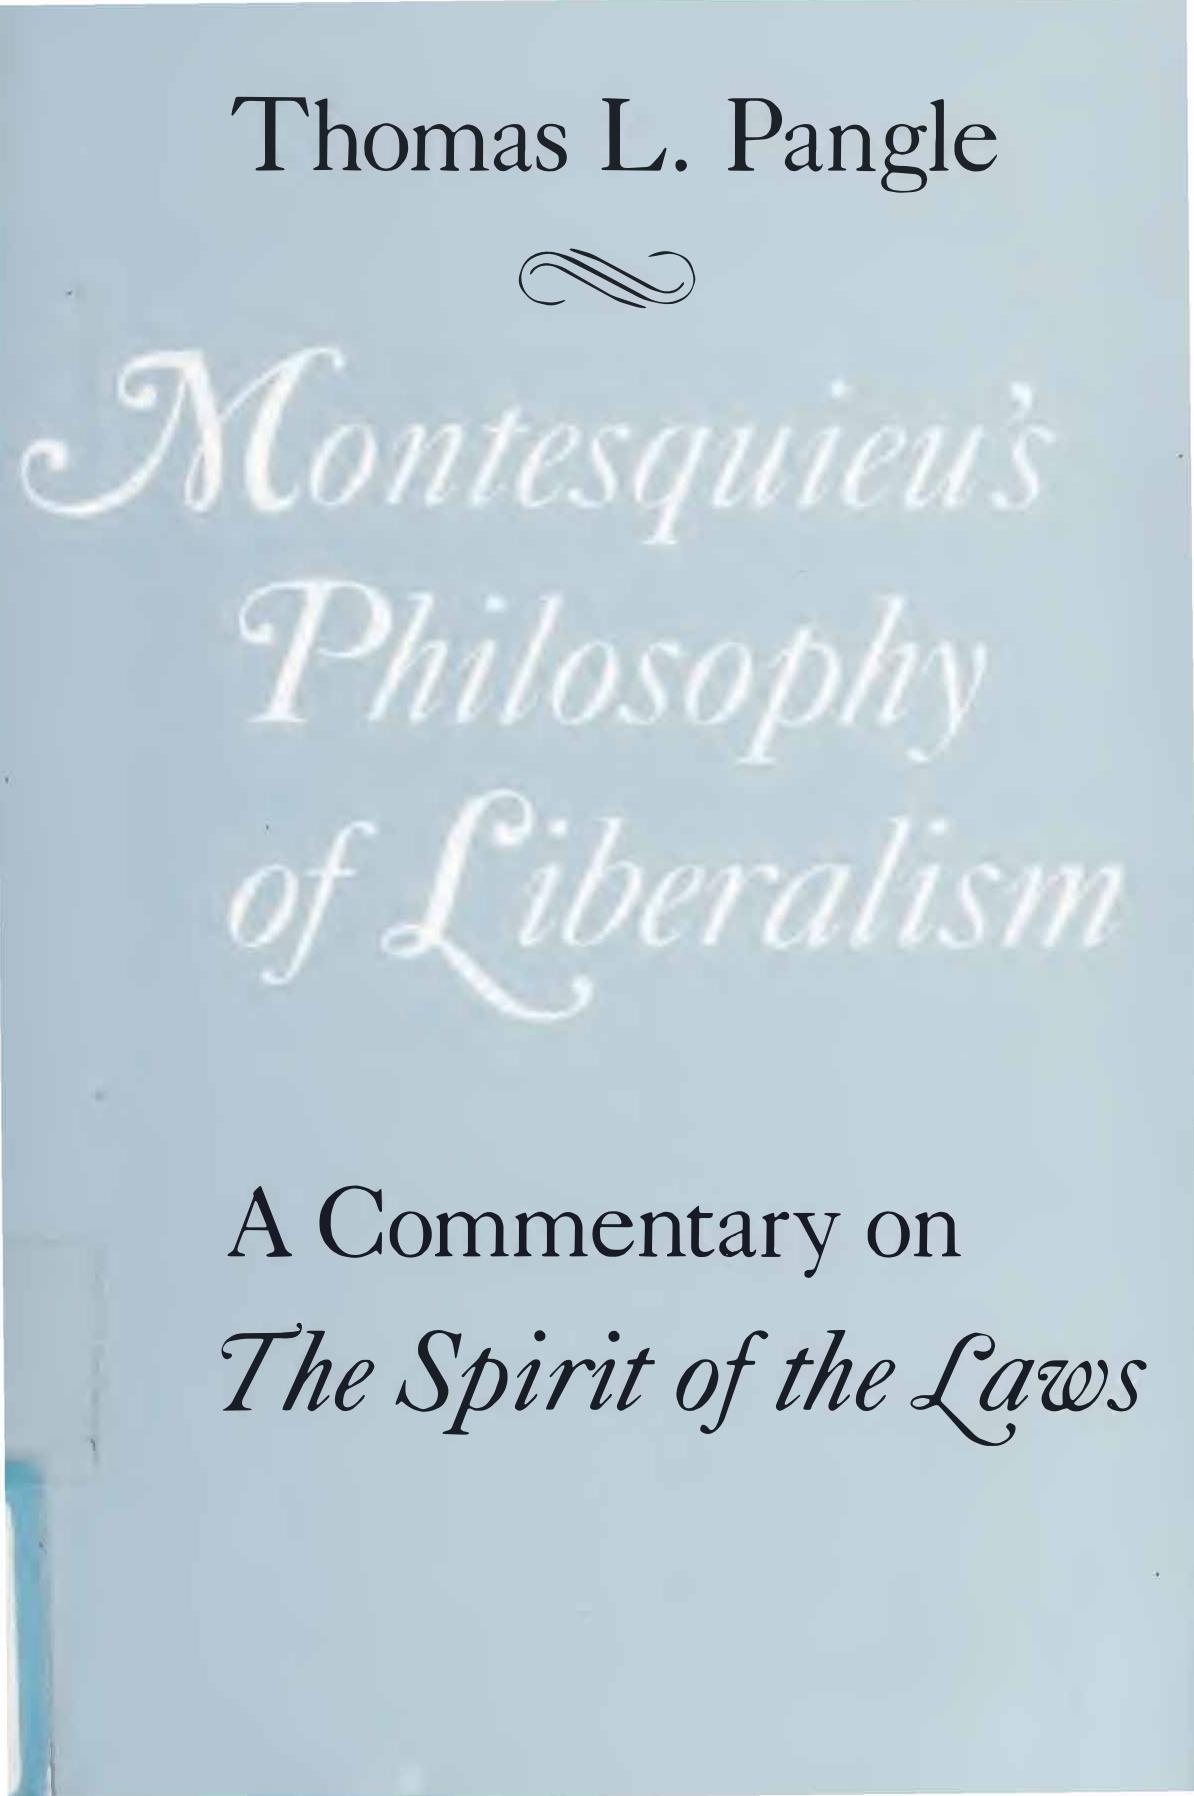 Montesquieu's Philosophy of Liberalism - Commentary on Spirit of Laws by Thomas L. Pangle